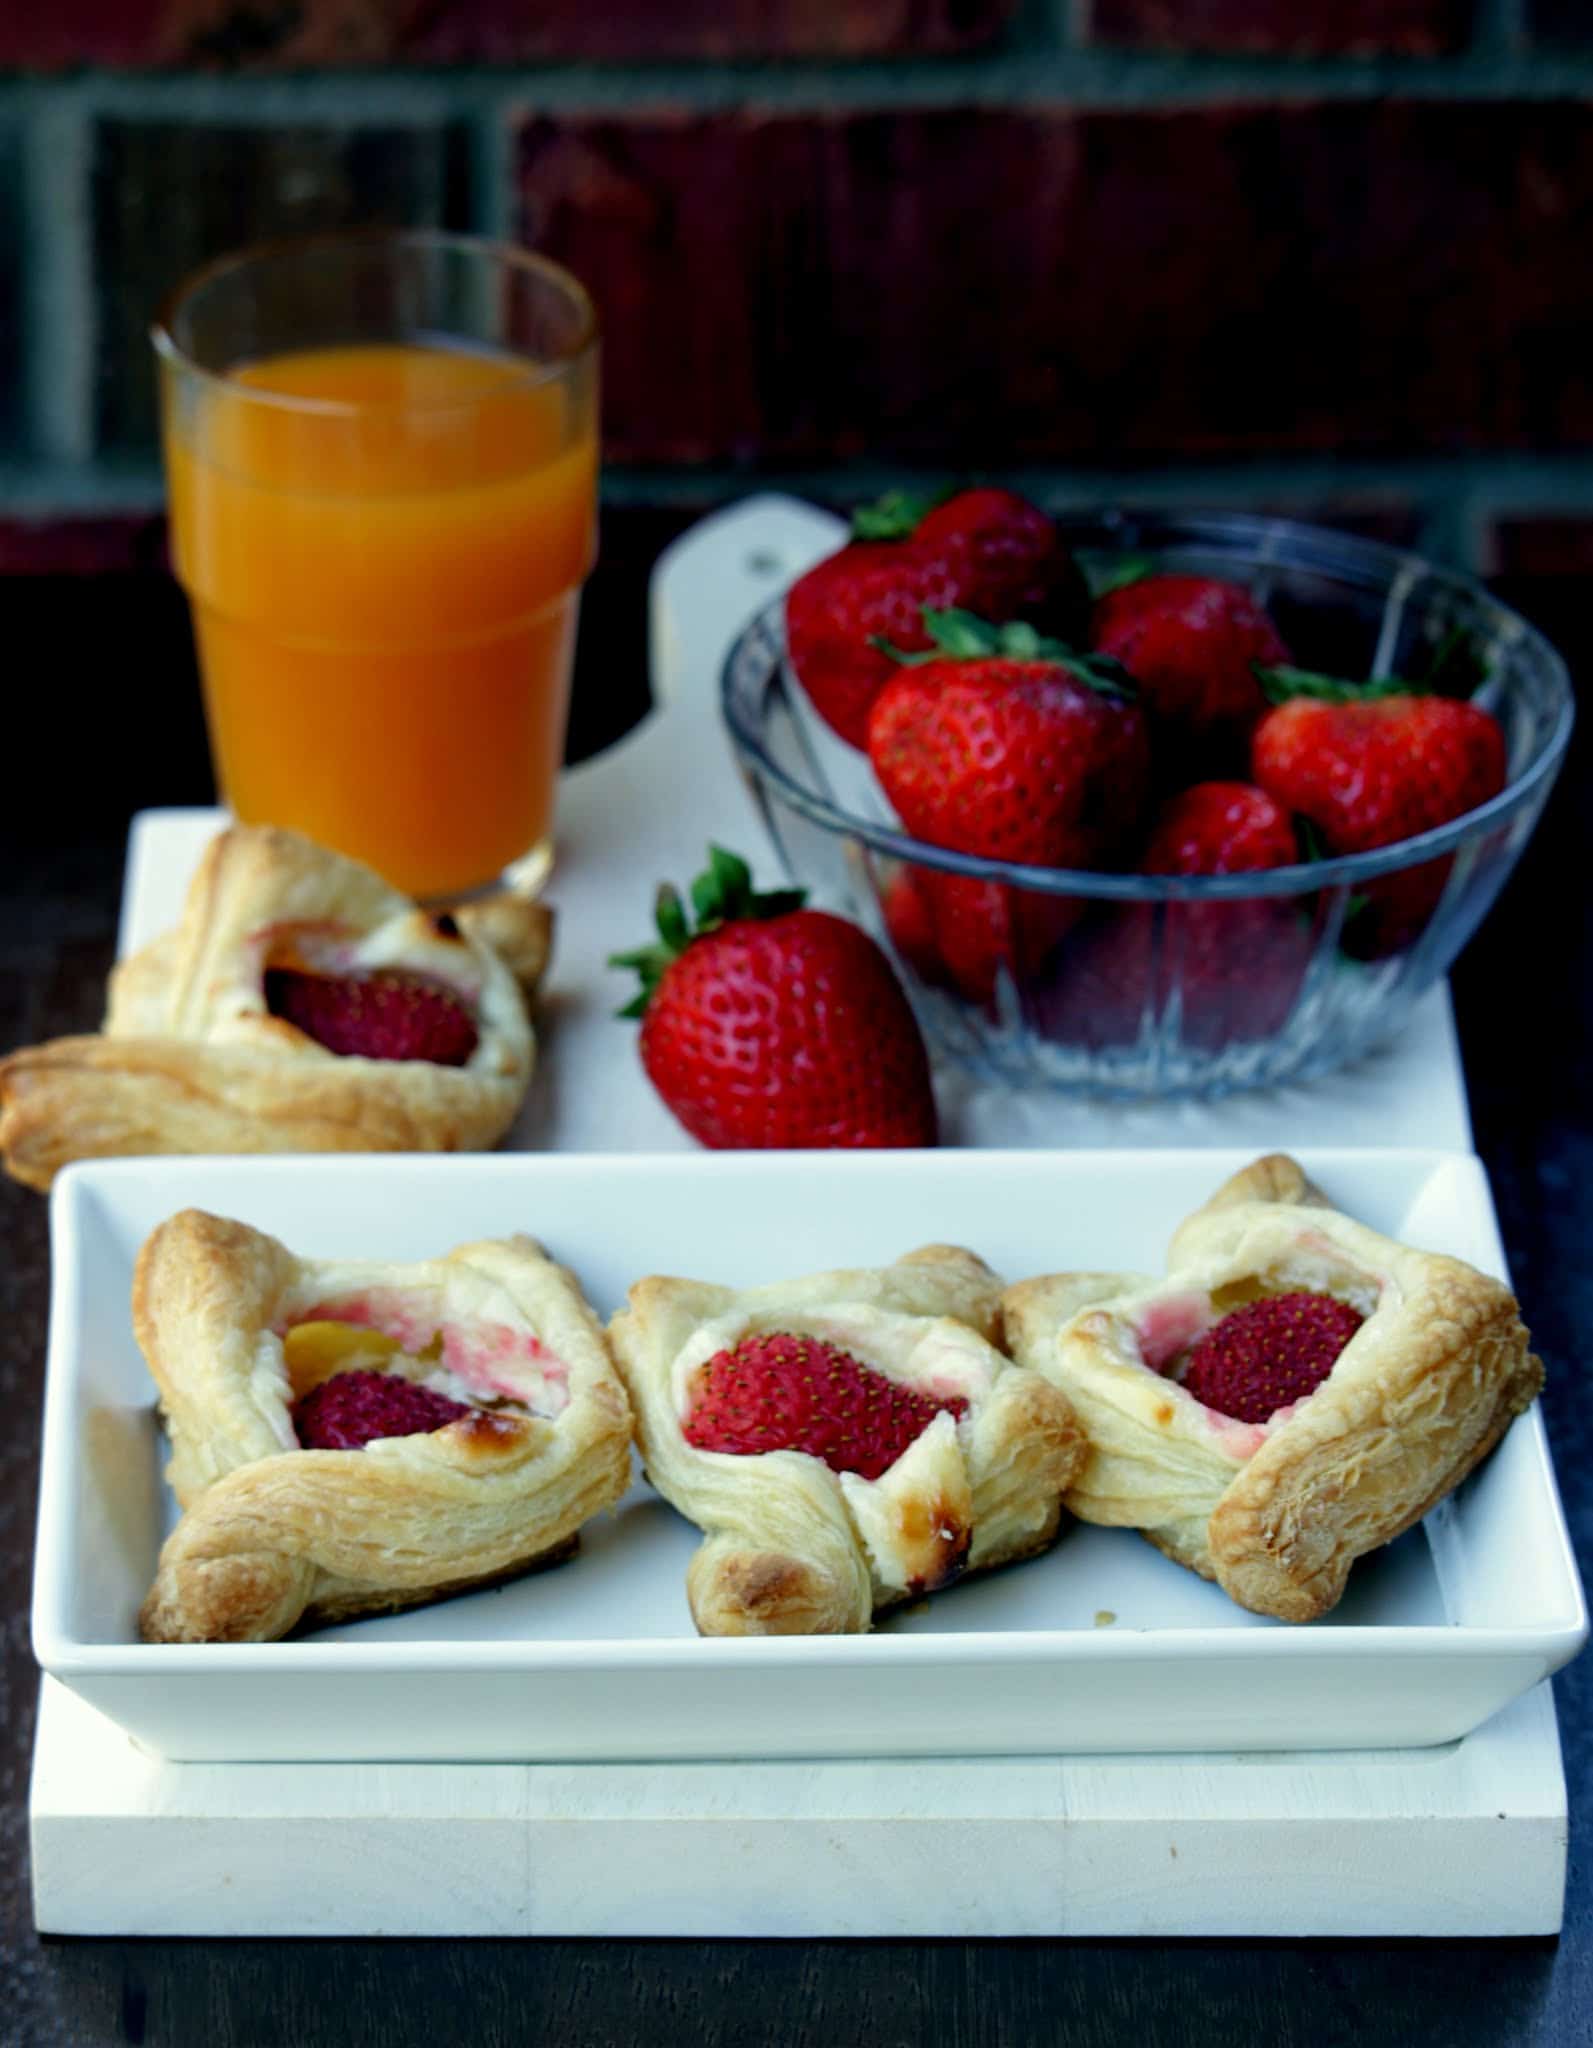 Strawberry Cream Cheese Pastry with juice and fresh strawberries in the background